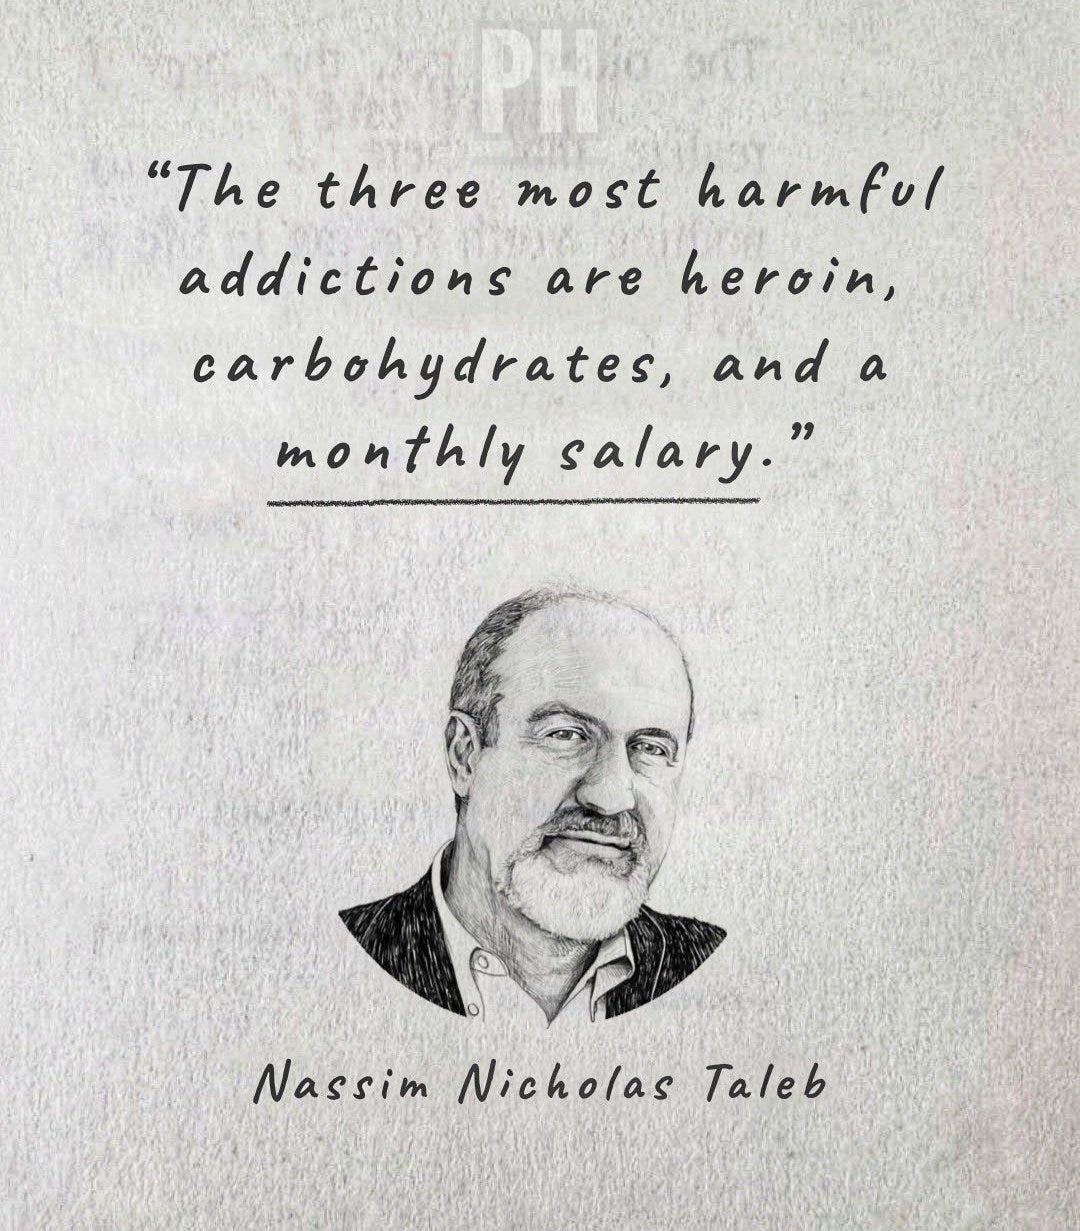 Premal Hathiwala on Twitter: "The three most harmful addictions are heroin,  carbohydrates and a monthly salary. - Nassim Nicholas Taleb #quote #harmful  #addiction #salary #think https://t.co/MFh0U73SS8" / Twitter